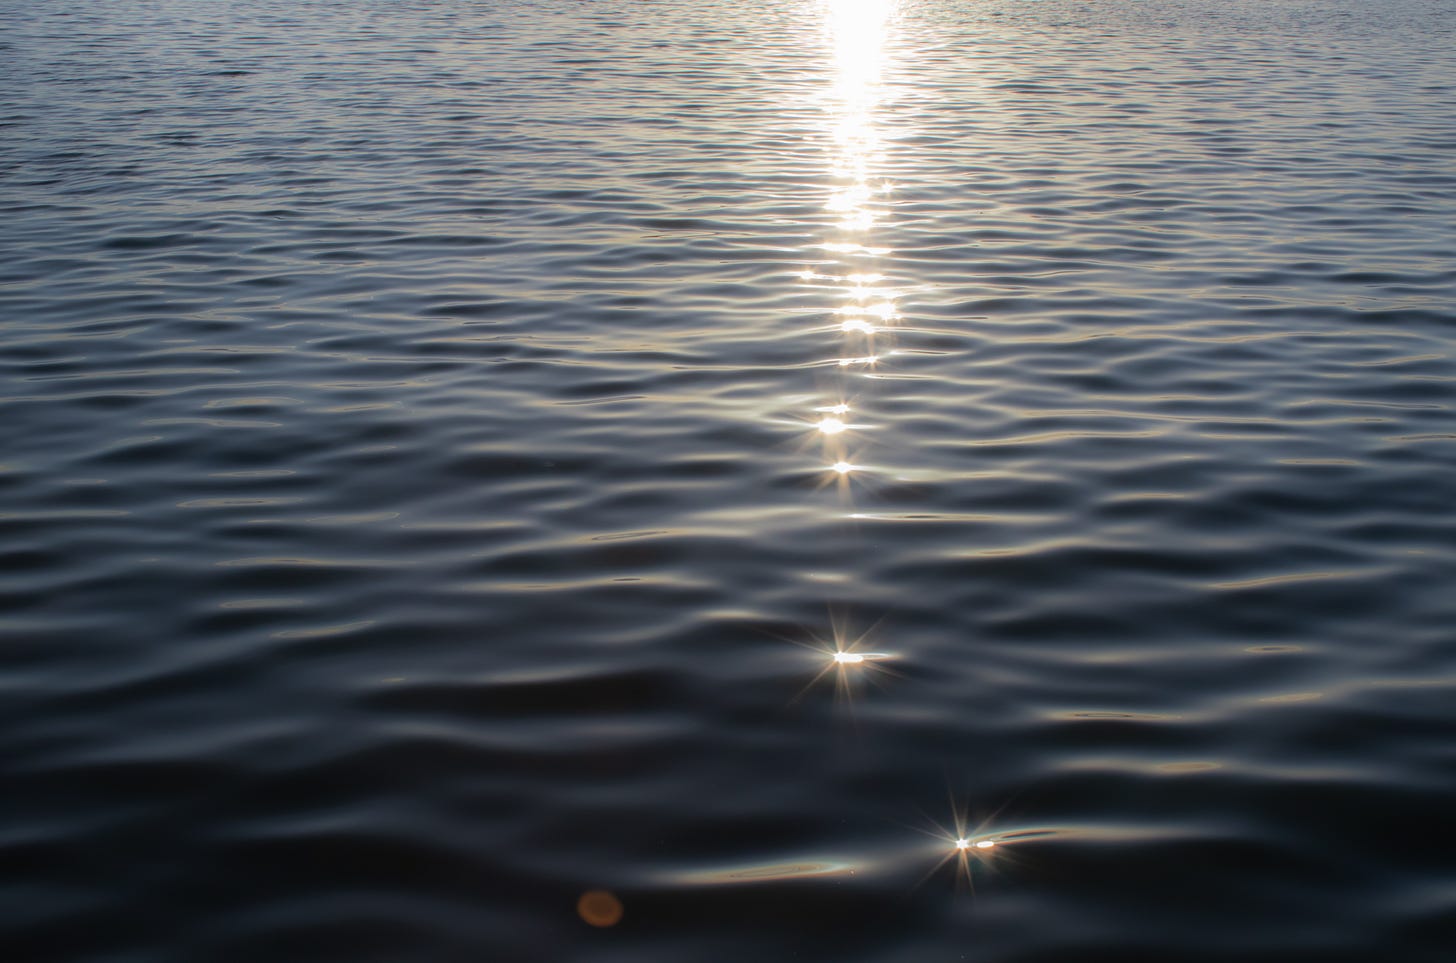 Light glimmer on a steady body of water